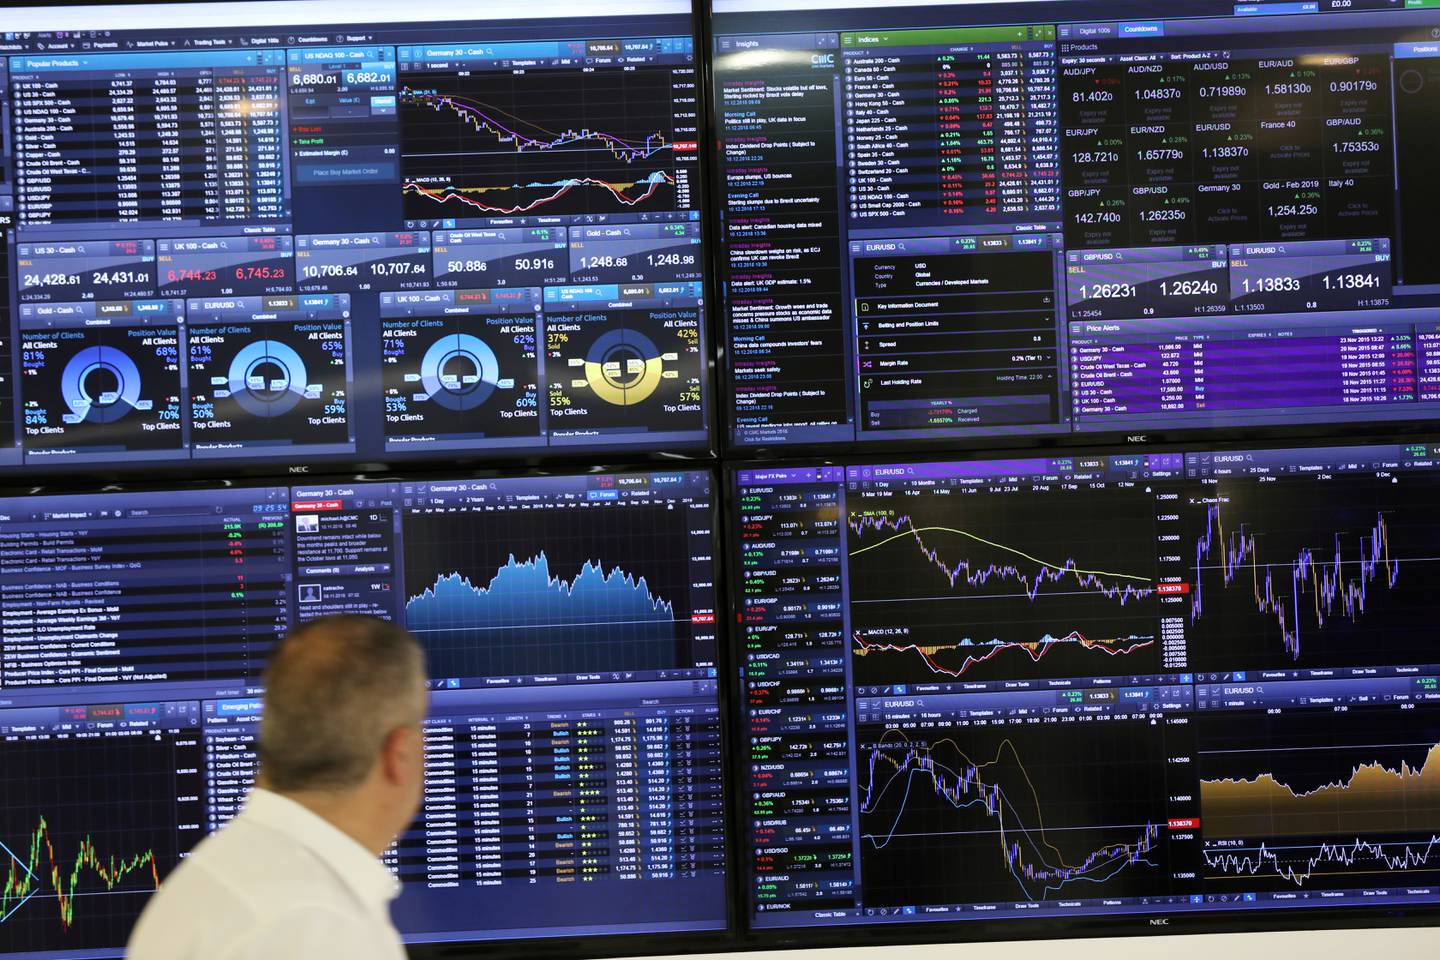 FILE PHOTO: A trader works as a screen shows market data behind him at CMC markets in London, Britain, December 11, 2018. REUTERS/Simon Dawson/File Photo